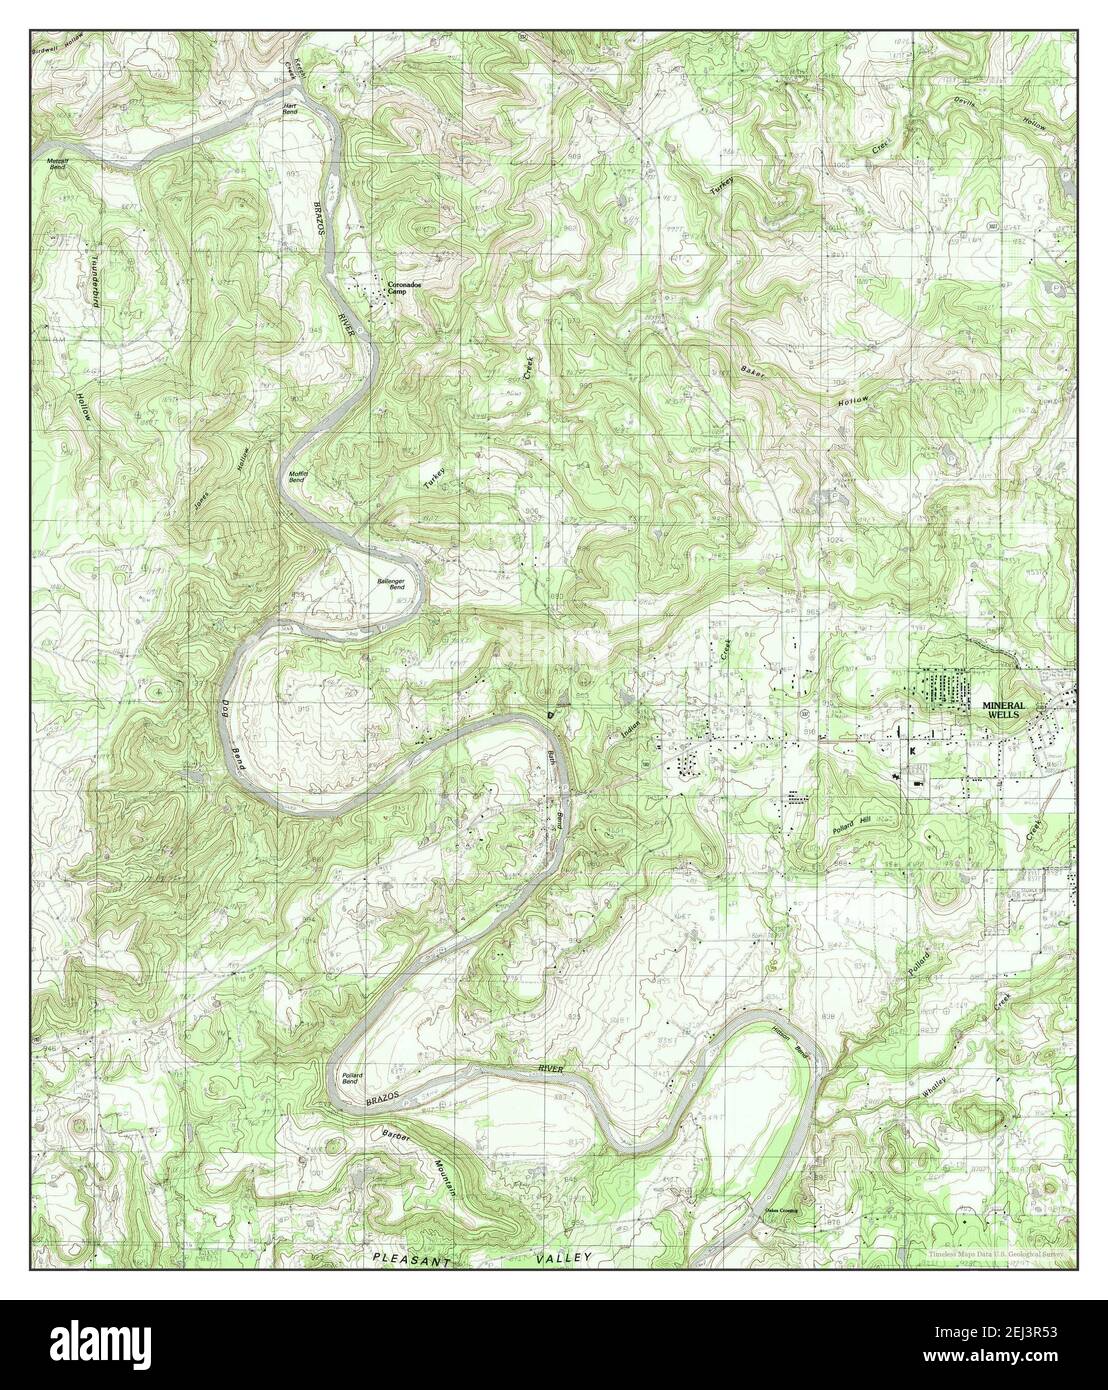 Mineral Wells West, Texas, map 1984, 1:24000, United States of America by Timeless Maps, data U.S. Geological Survey Foto Stock